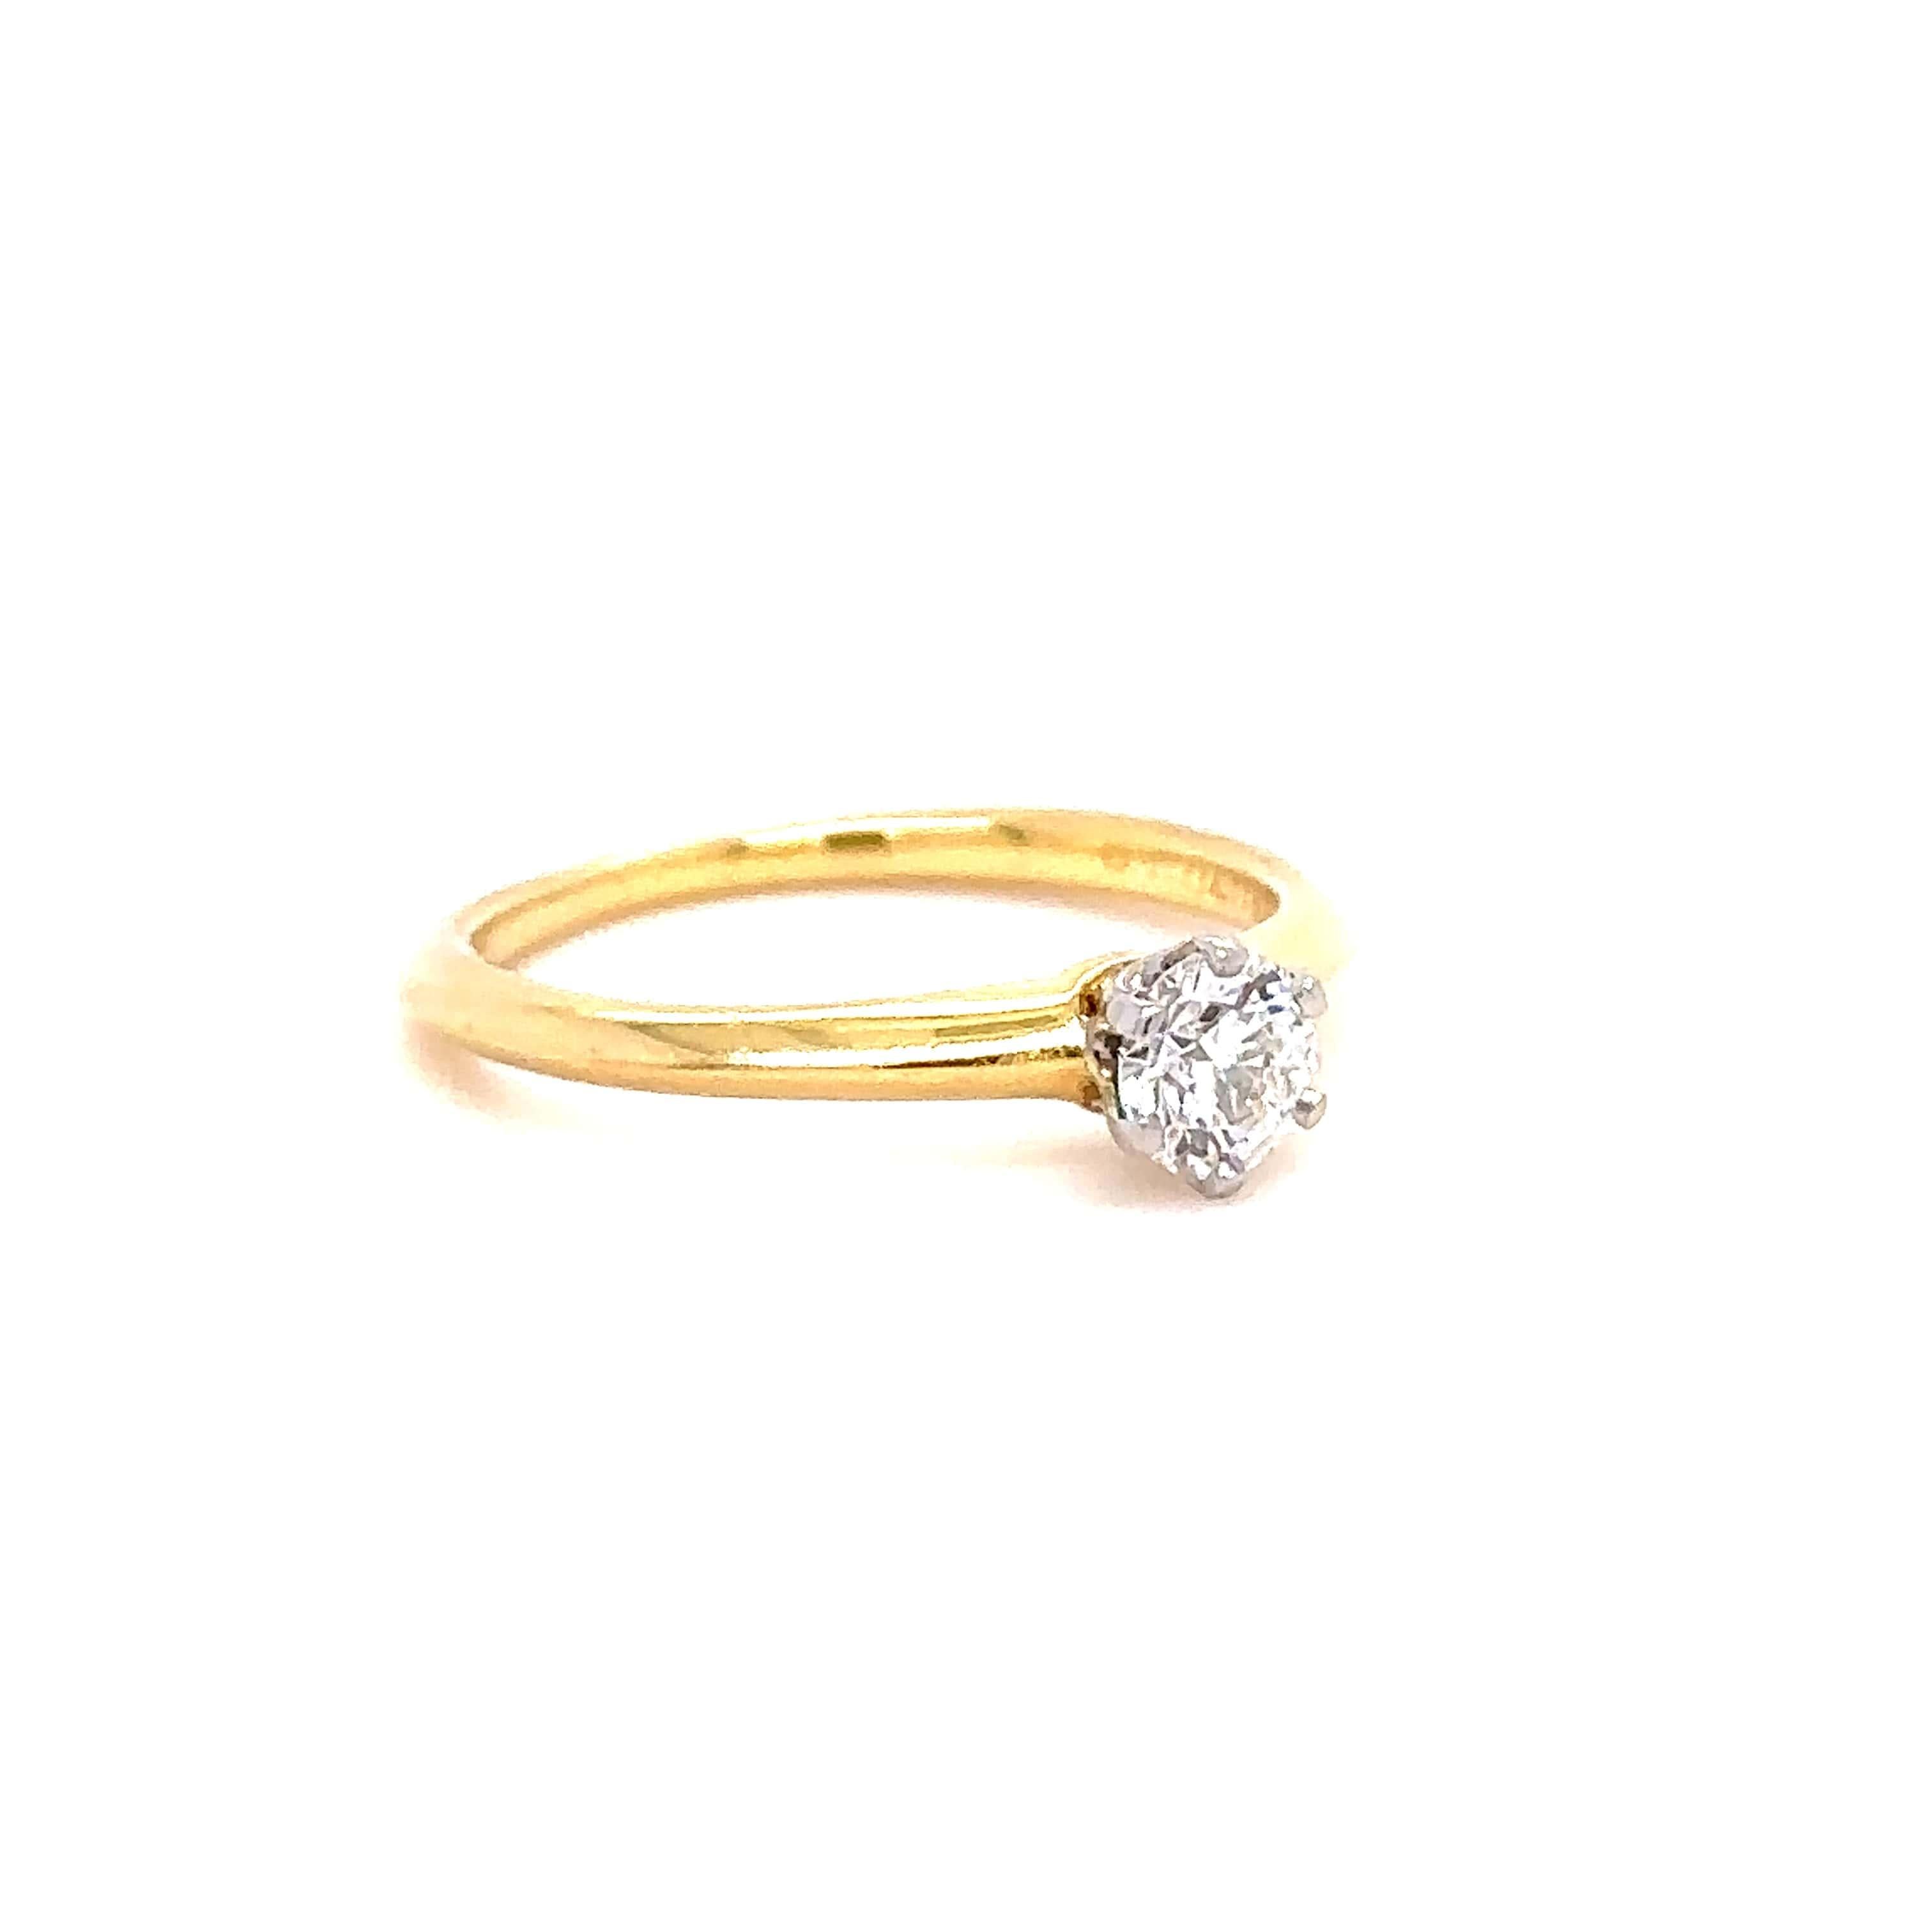 Unique features: 

The Tiffany Setting Engagement ring in 18k Yellow Gold. Set with a single round, brilliant cut diamond

Metal: 18k Yellow Gold
Carat: 0.33ct
Colour: F
Clarity:  VVS2
Cut: Round Brilliant
Weight: 2.37 grams
Engravings/Markings: